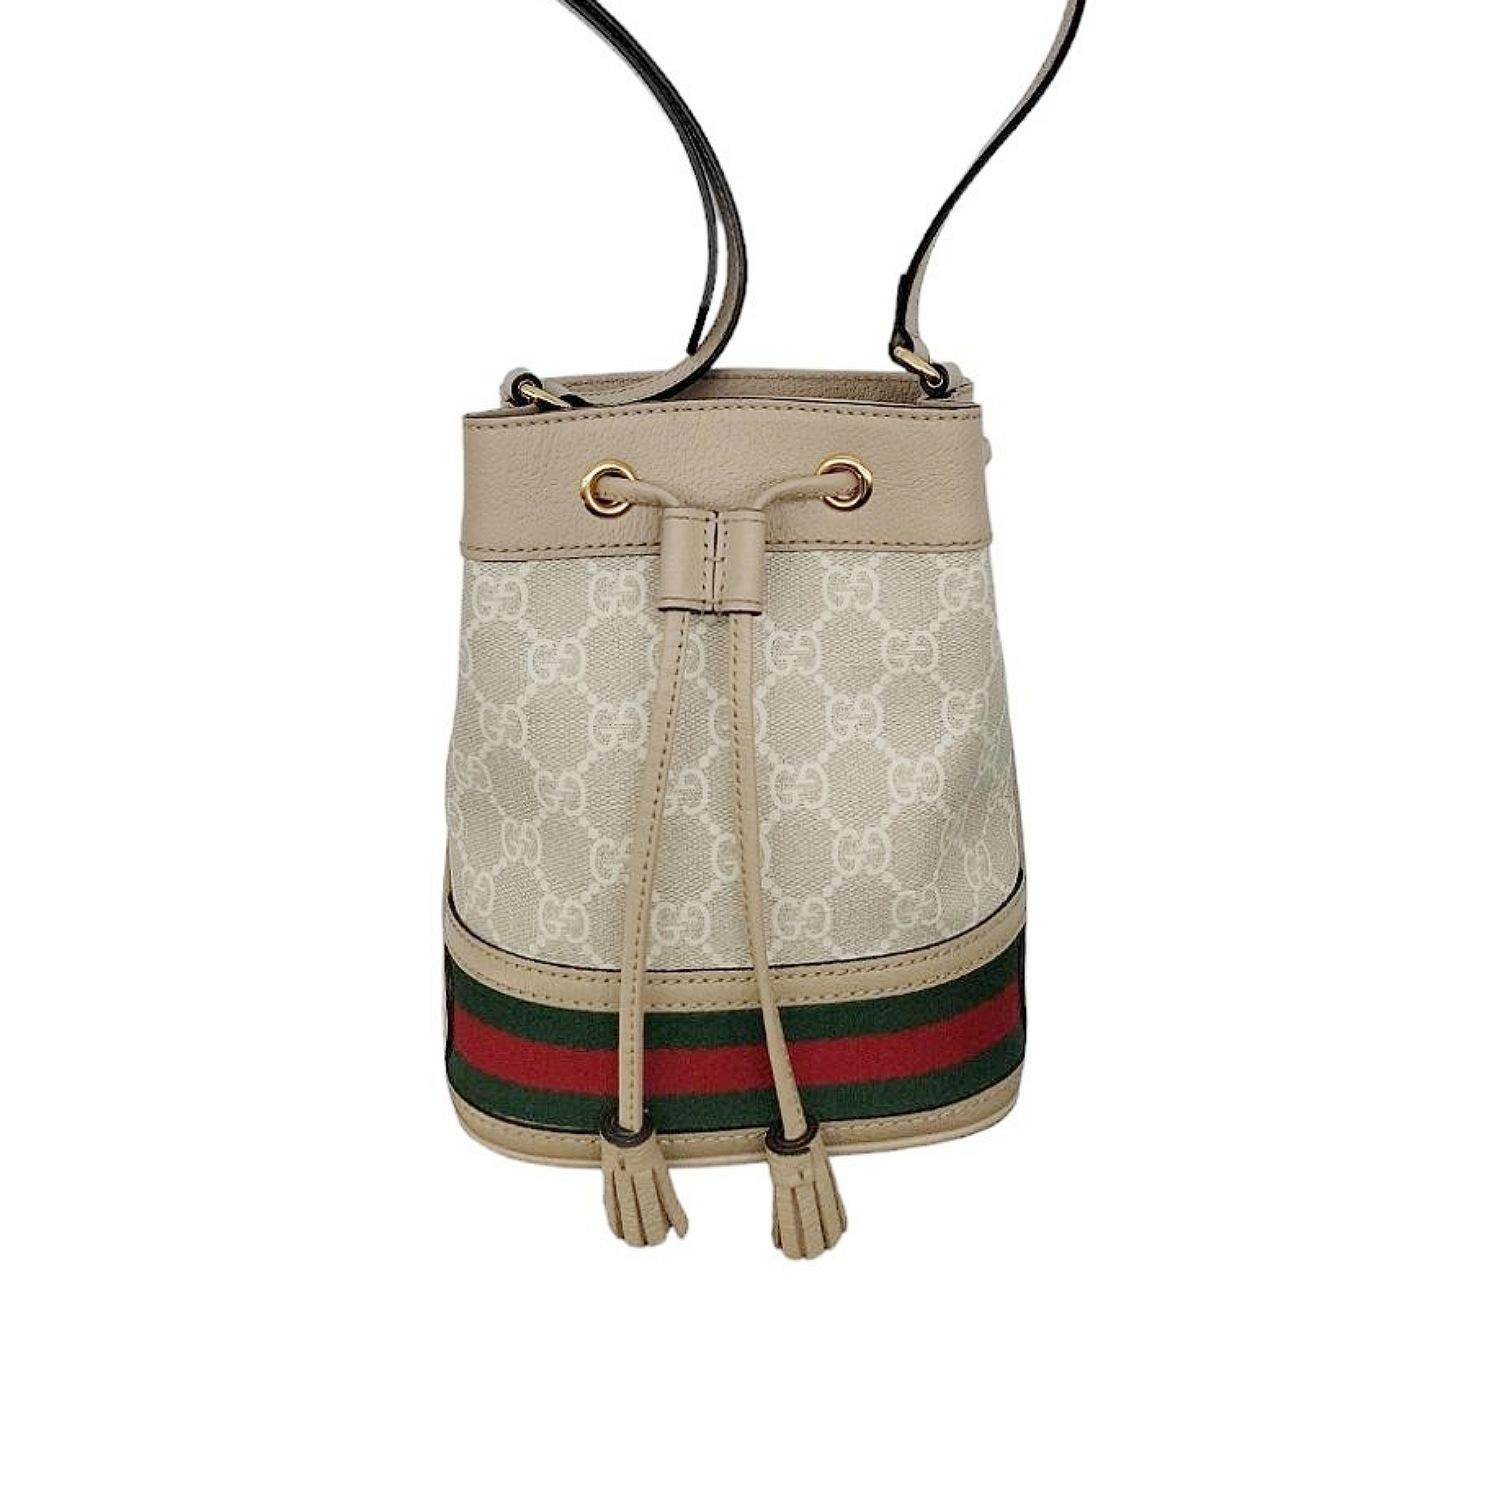 Gucci GG Supreme Mini Ophidia Bucket bag. It is crafted from beige and white GG Supreme canvas and oatmeal leather trim with a green and red web stripe accent. It has gold-tone hardware, a drawstring closure, a cotton linen lining, and an adjustable